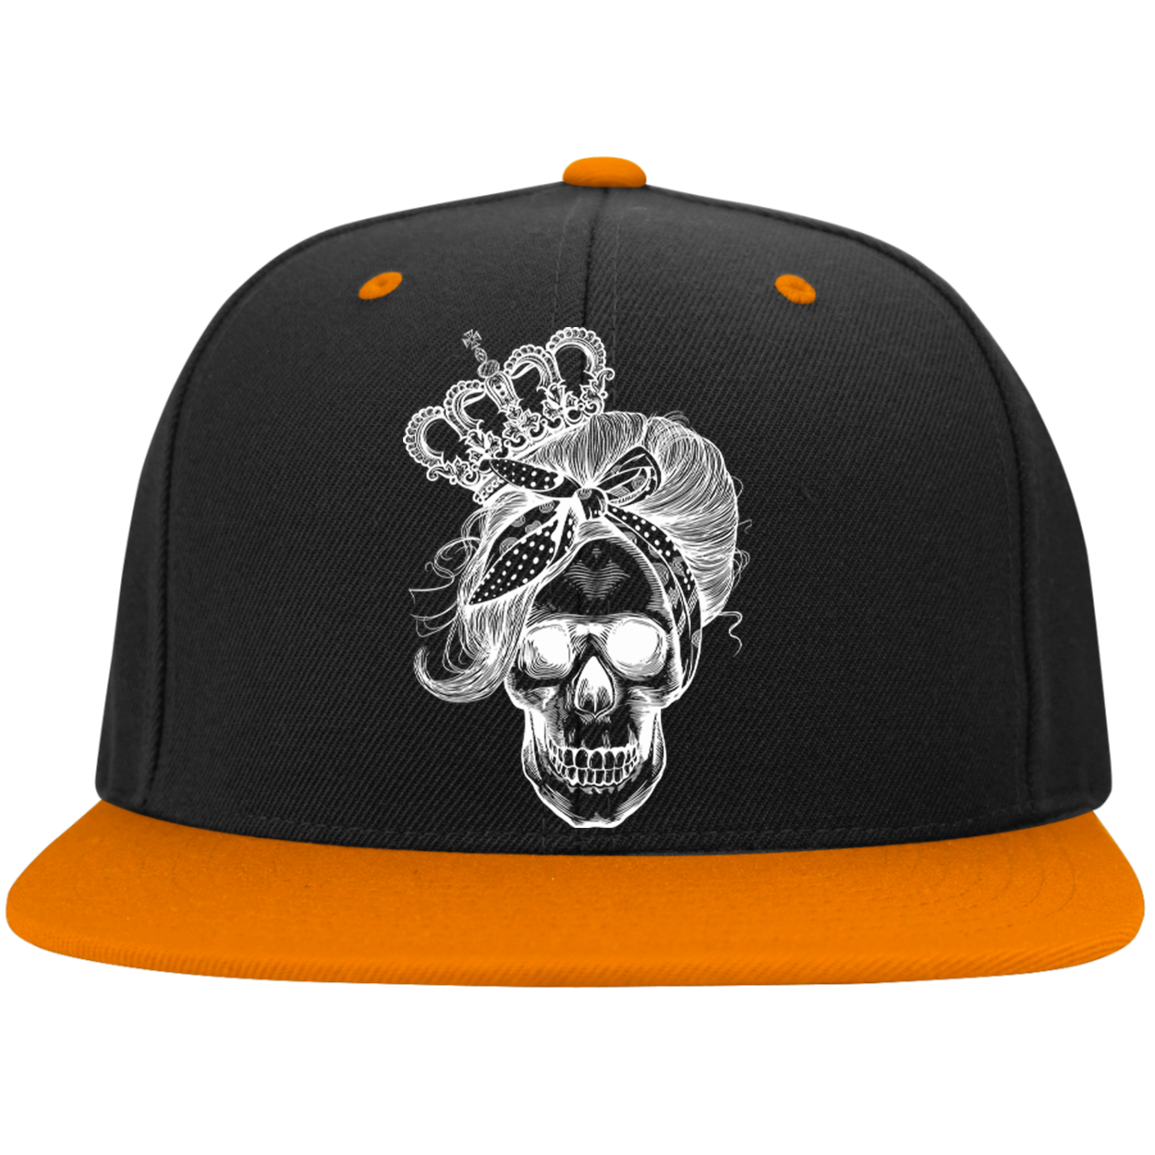 LONG LIVE THE QUEEN SKULL High-Profile Snapback Hat